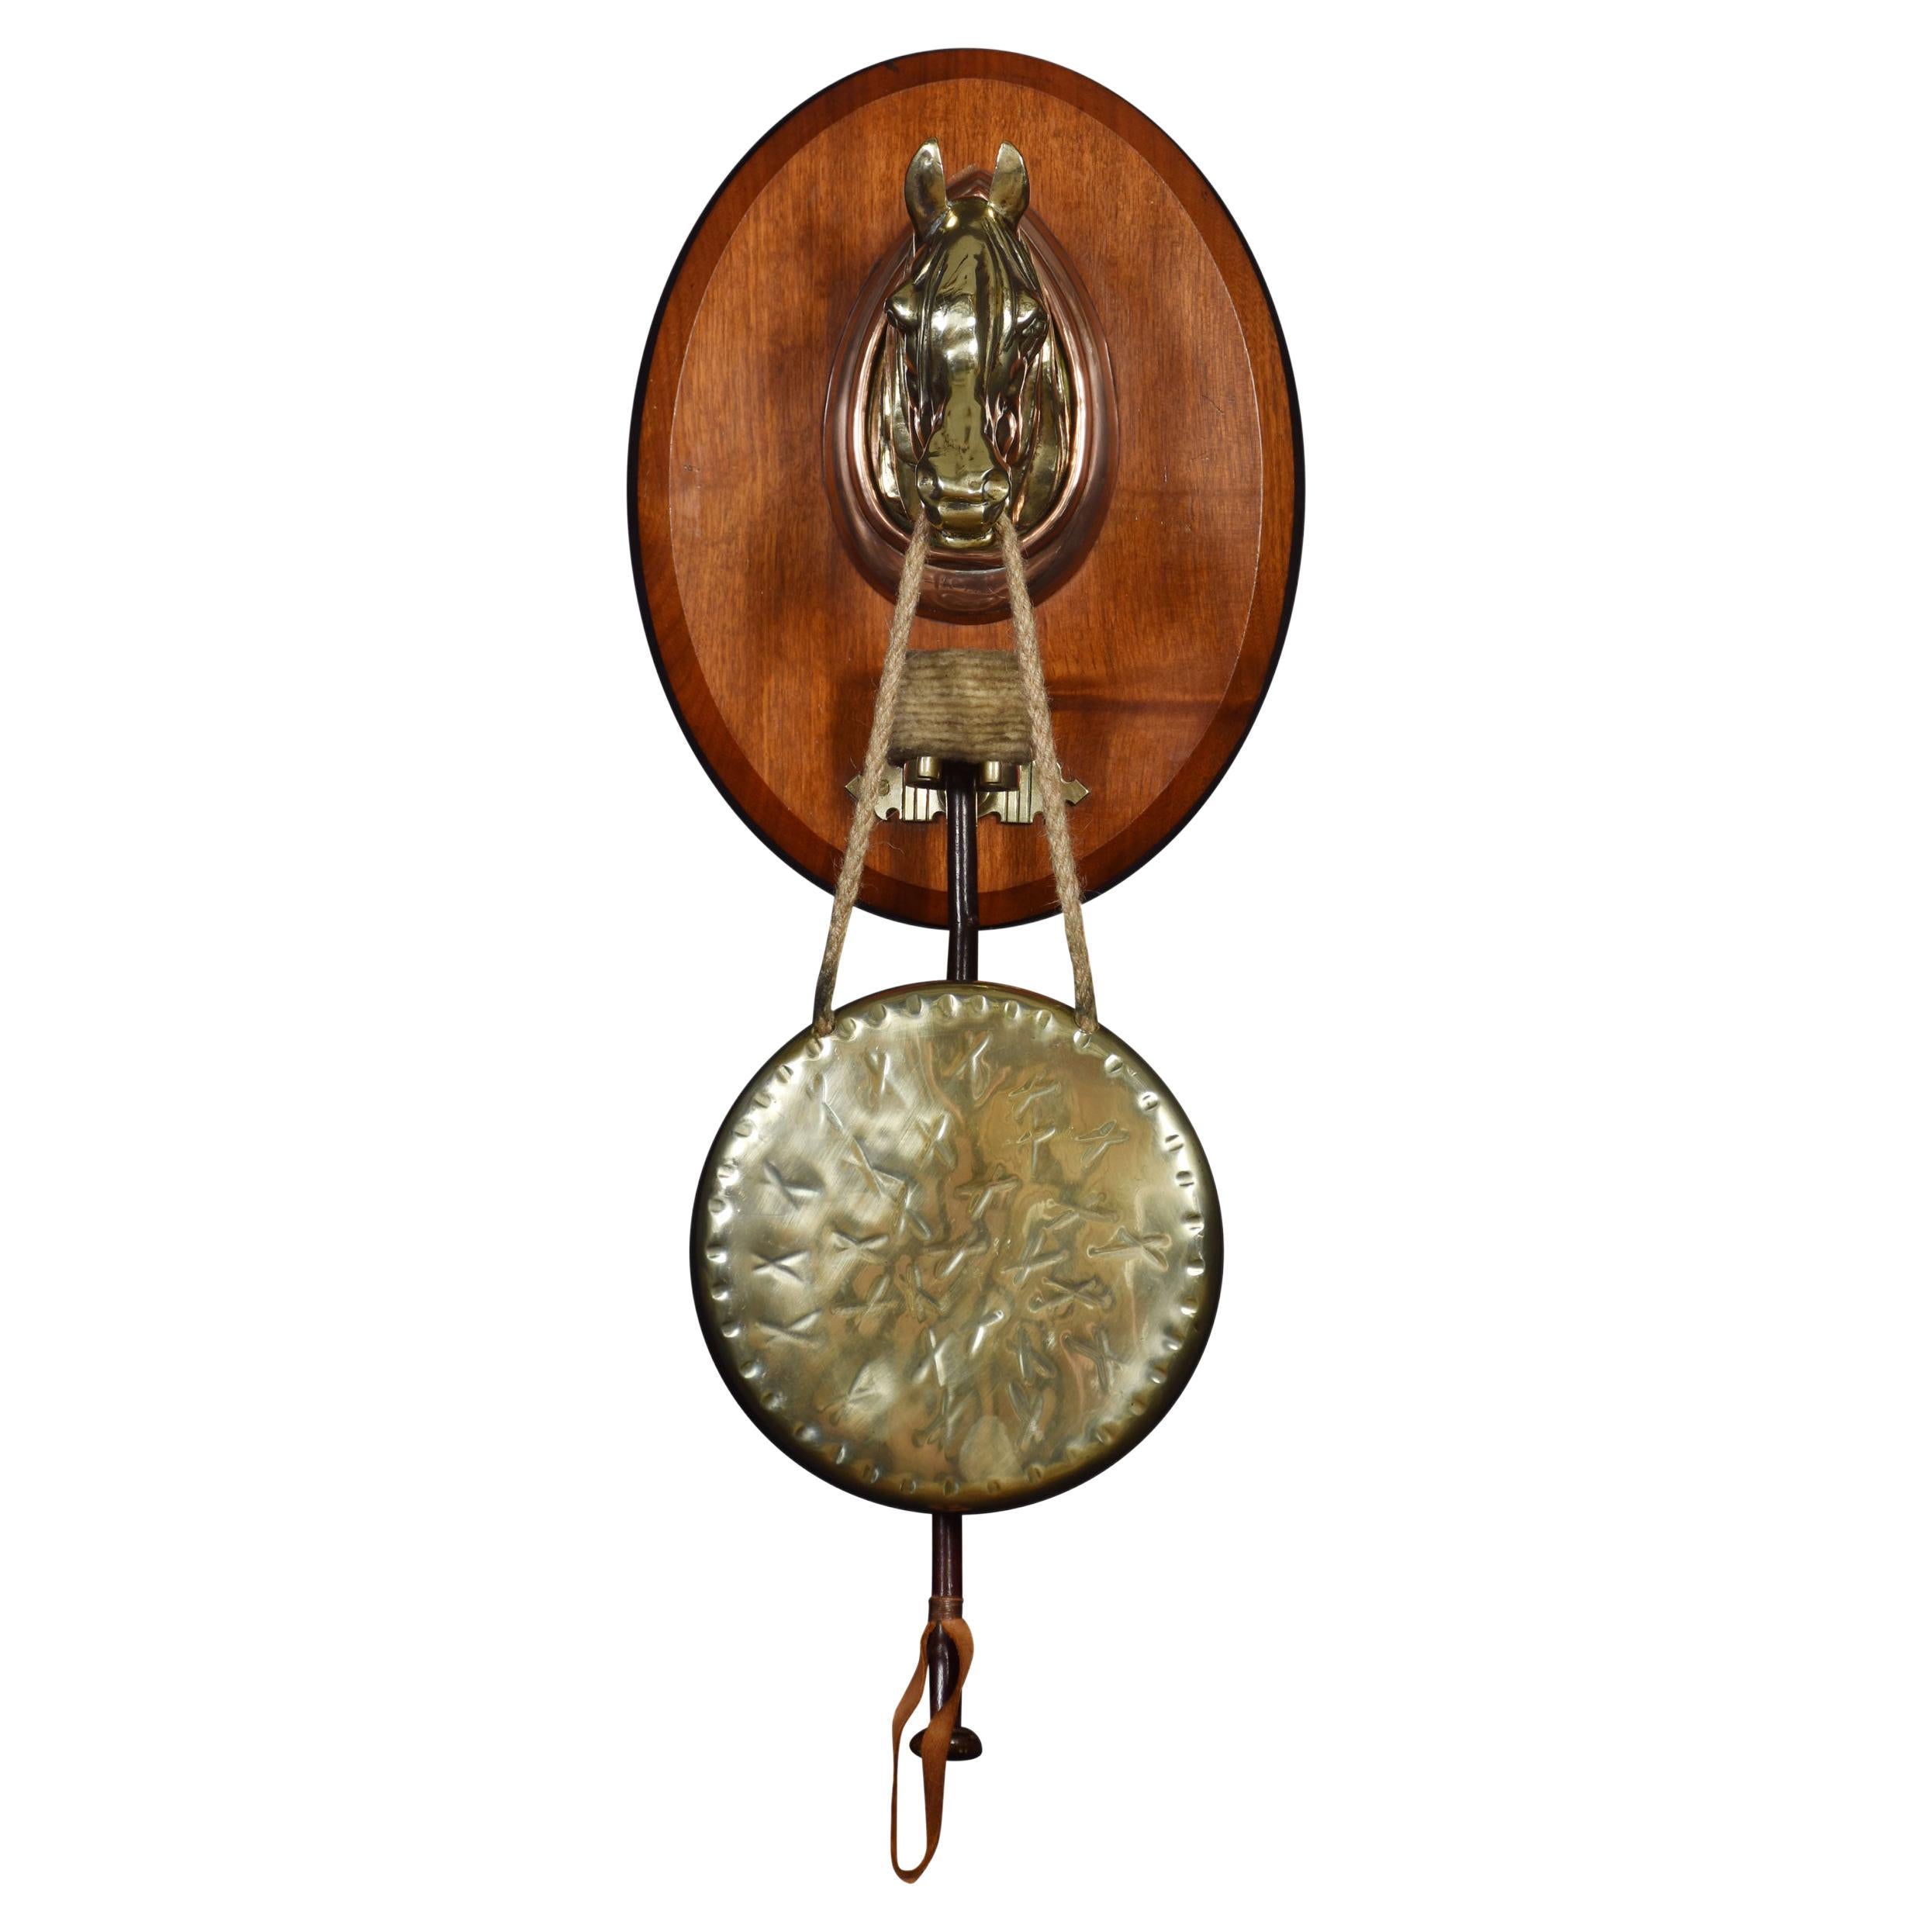 Wall Hanging Dinner Gong